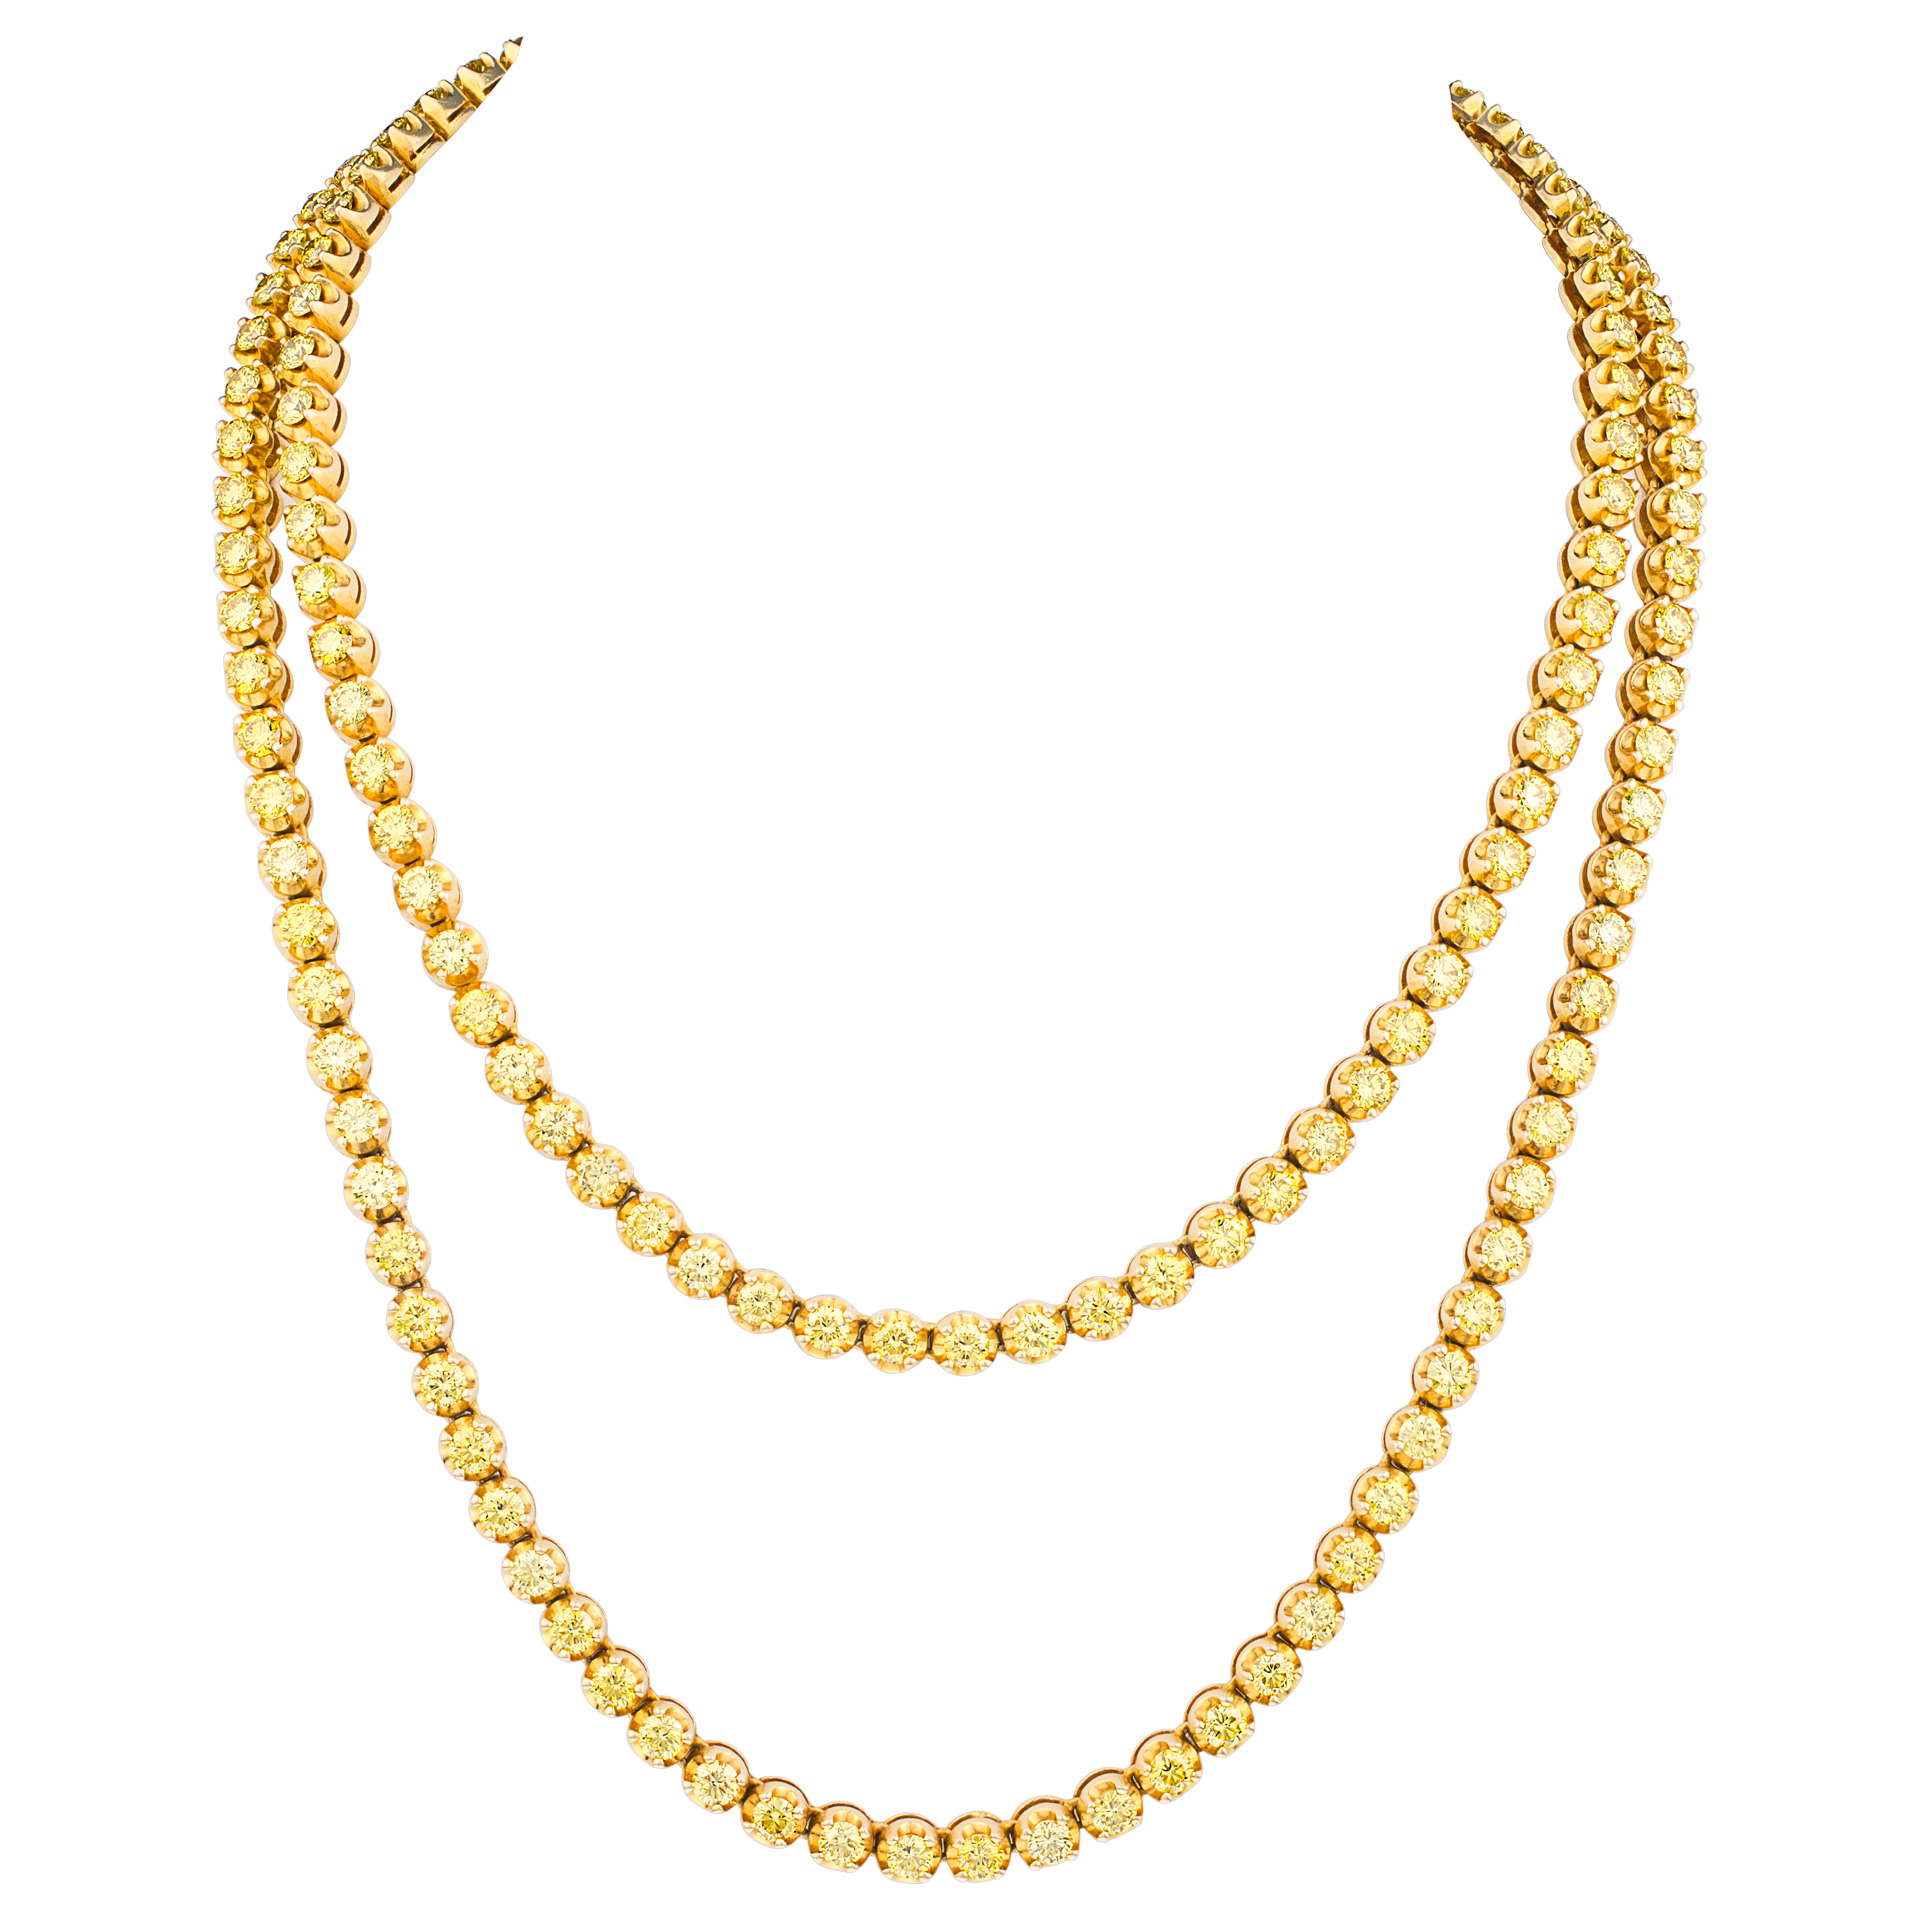 Golden yellow diamond necklace in 14k yellow gold